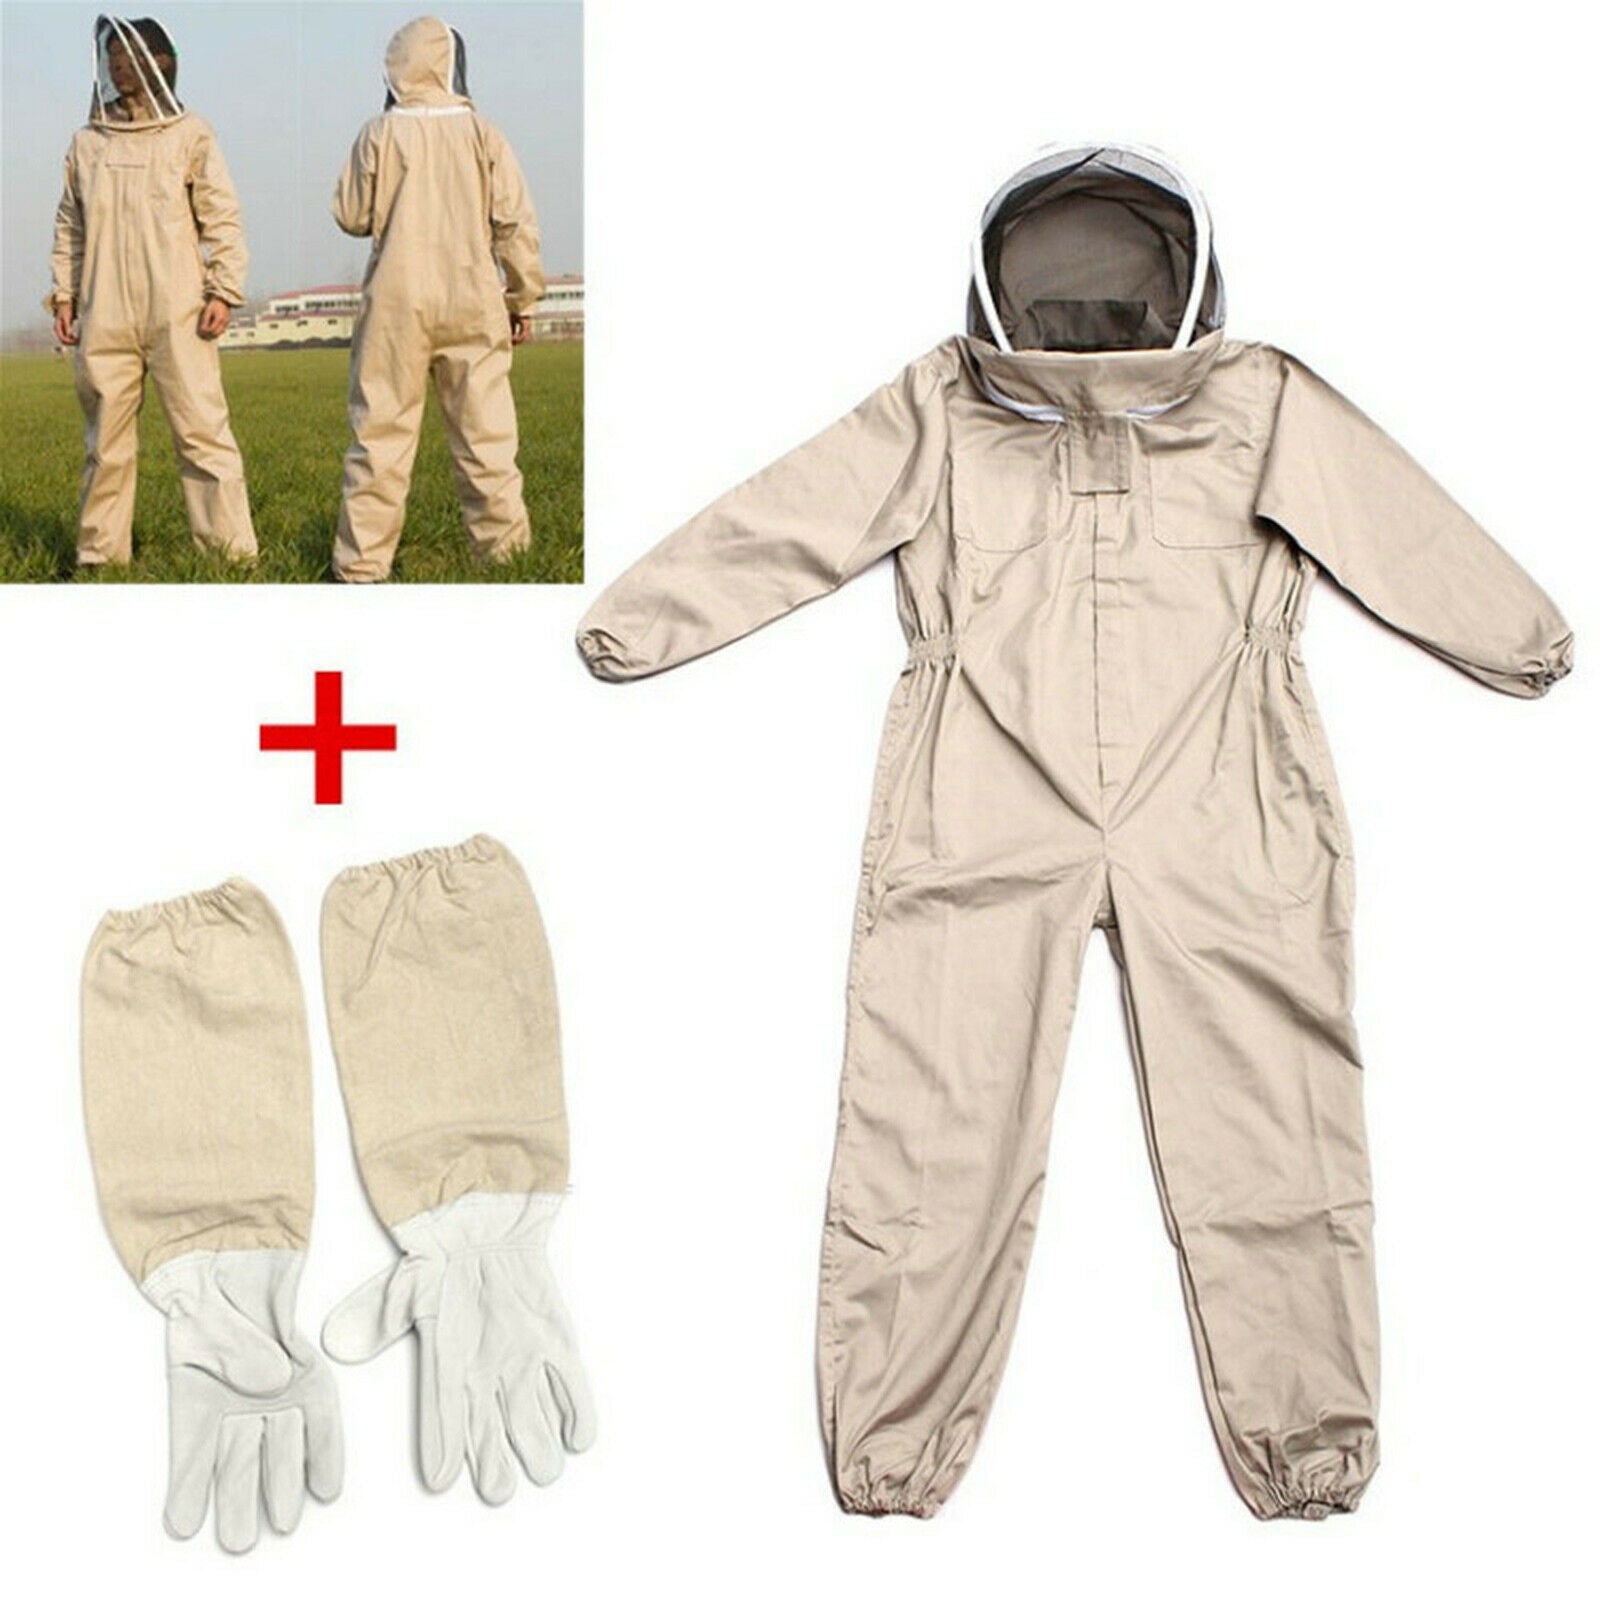 Unisex Bee Proof Beekeeping Suit Farm Unisex Outfit With Glove Veil Hood L